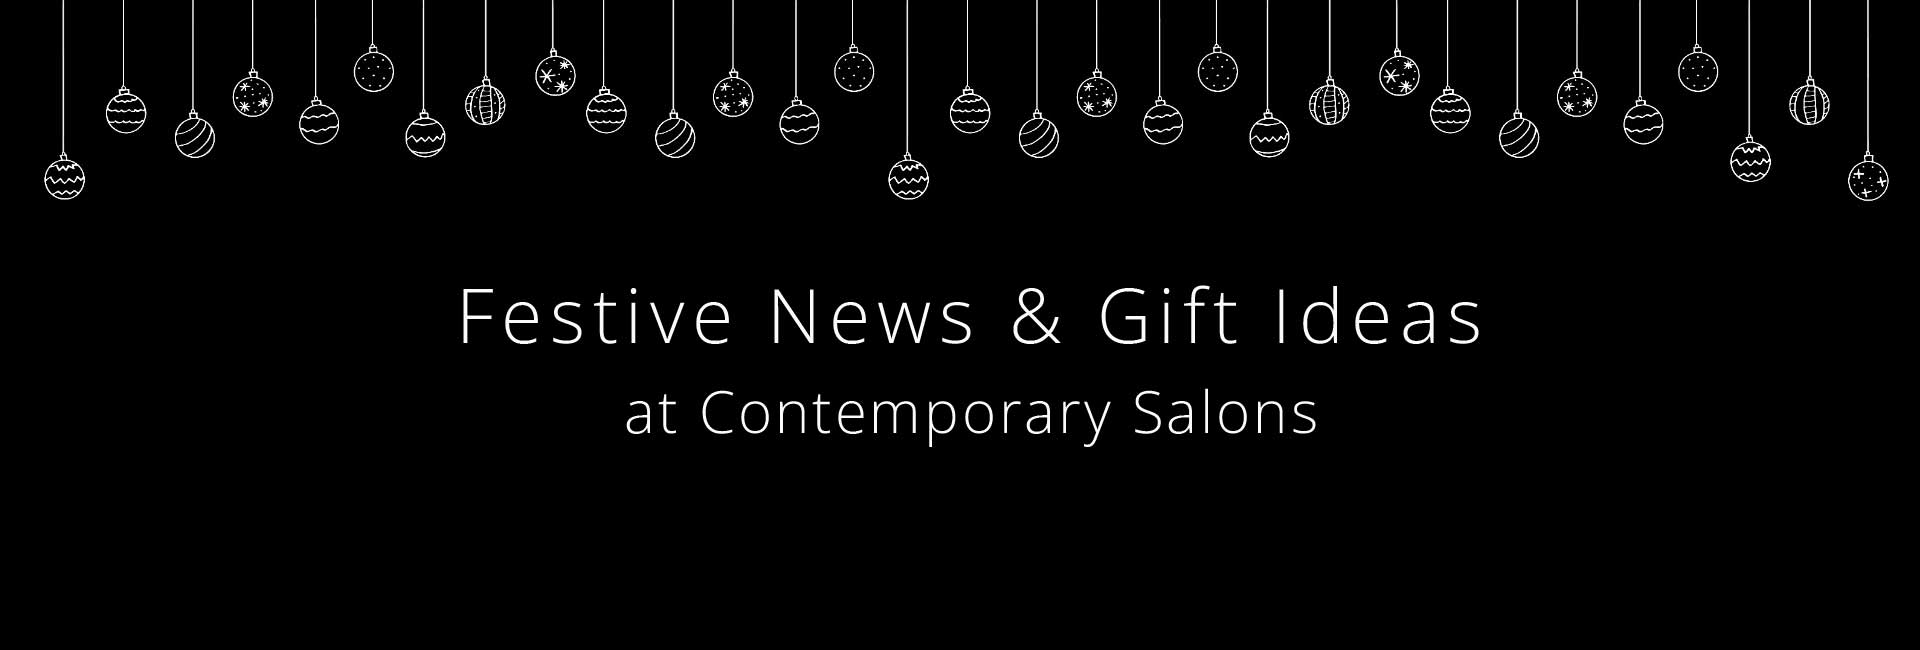 Festive News Gift Ideas Contemporary Salons North East England